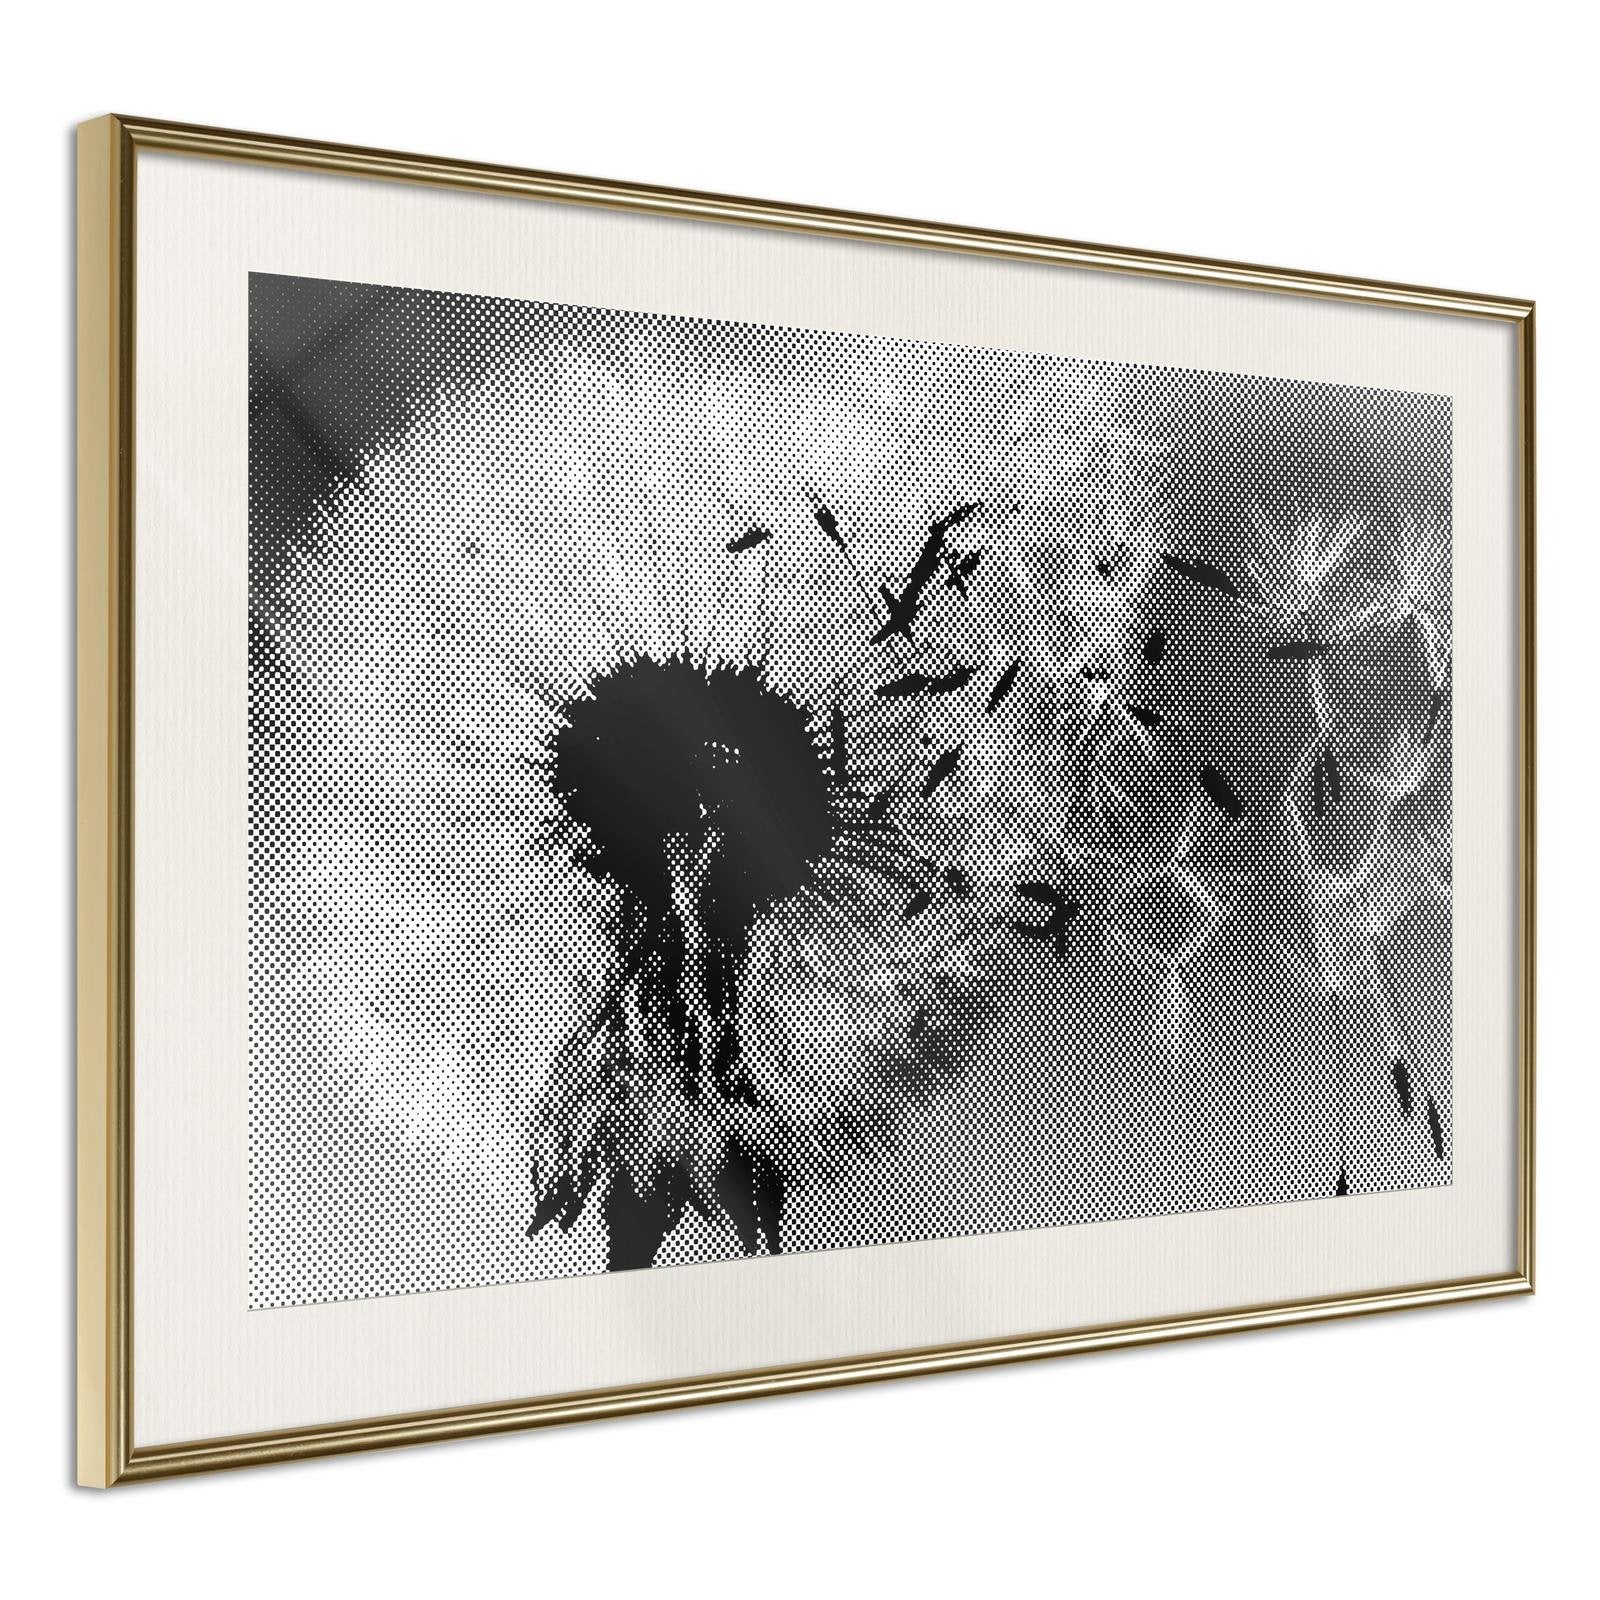 Inramad Poster / Tavla - Dandelion in the Wind-Poster Inramad-Artgeist-30x20-Guldram med passepartout-peaceofhome.se